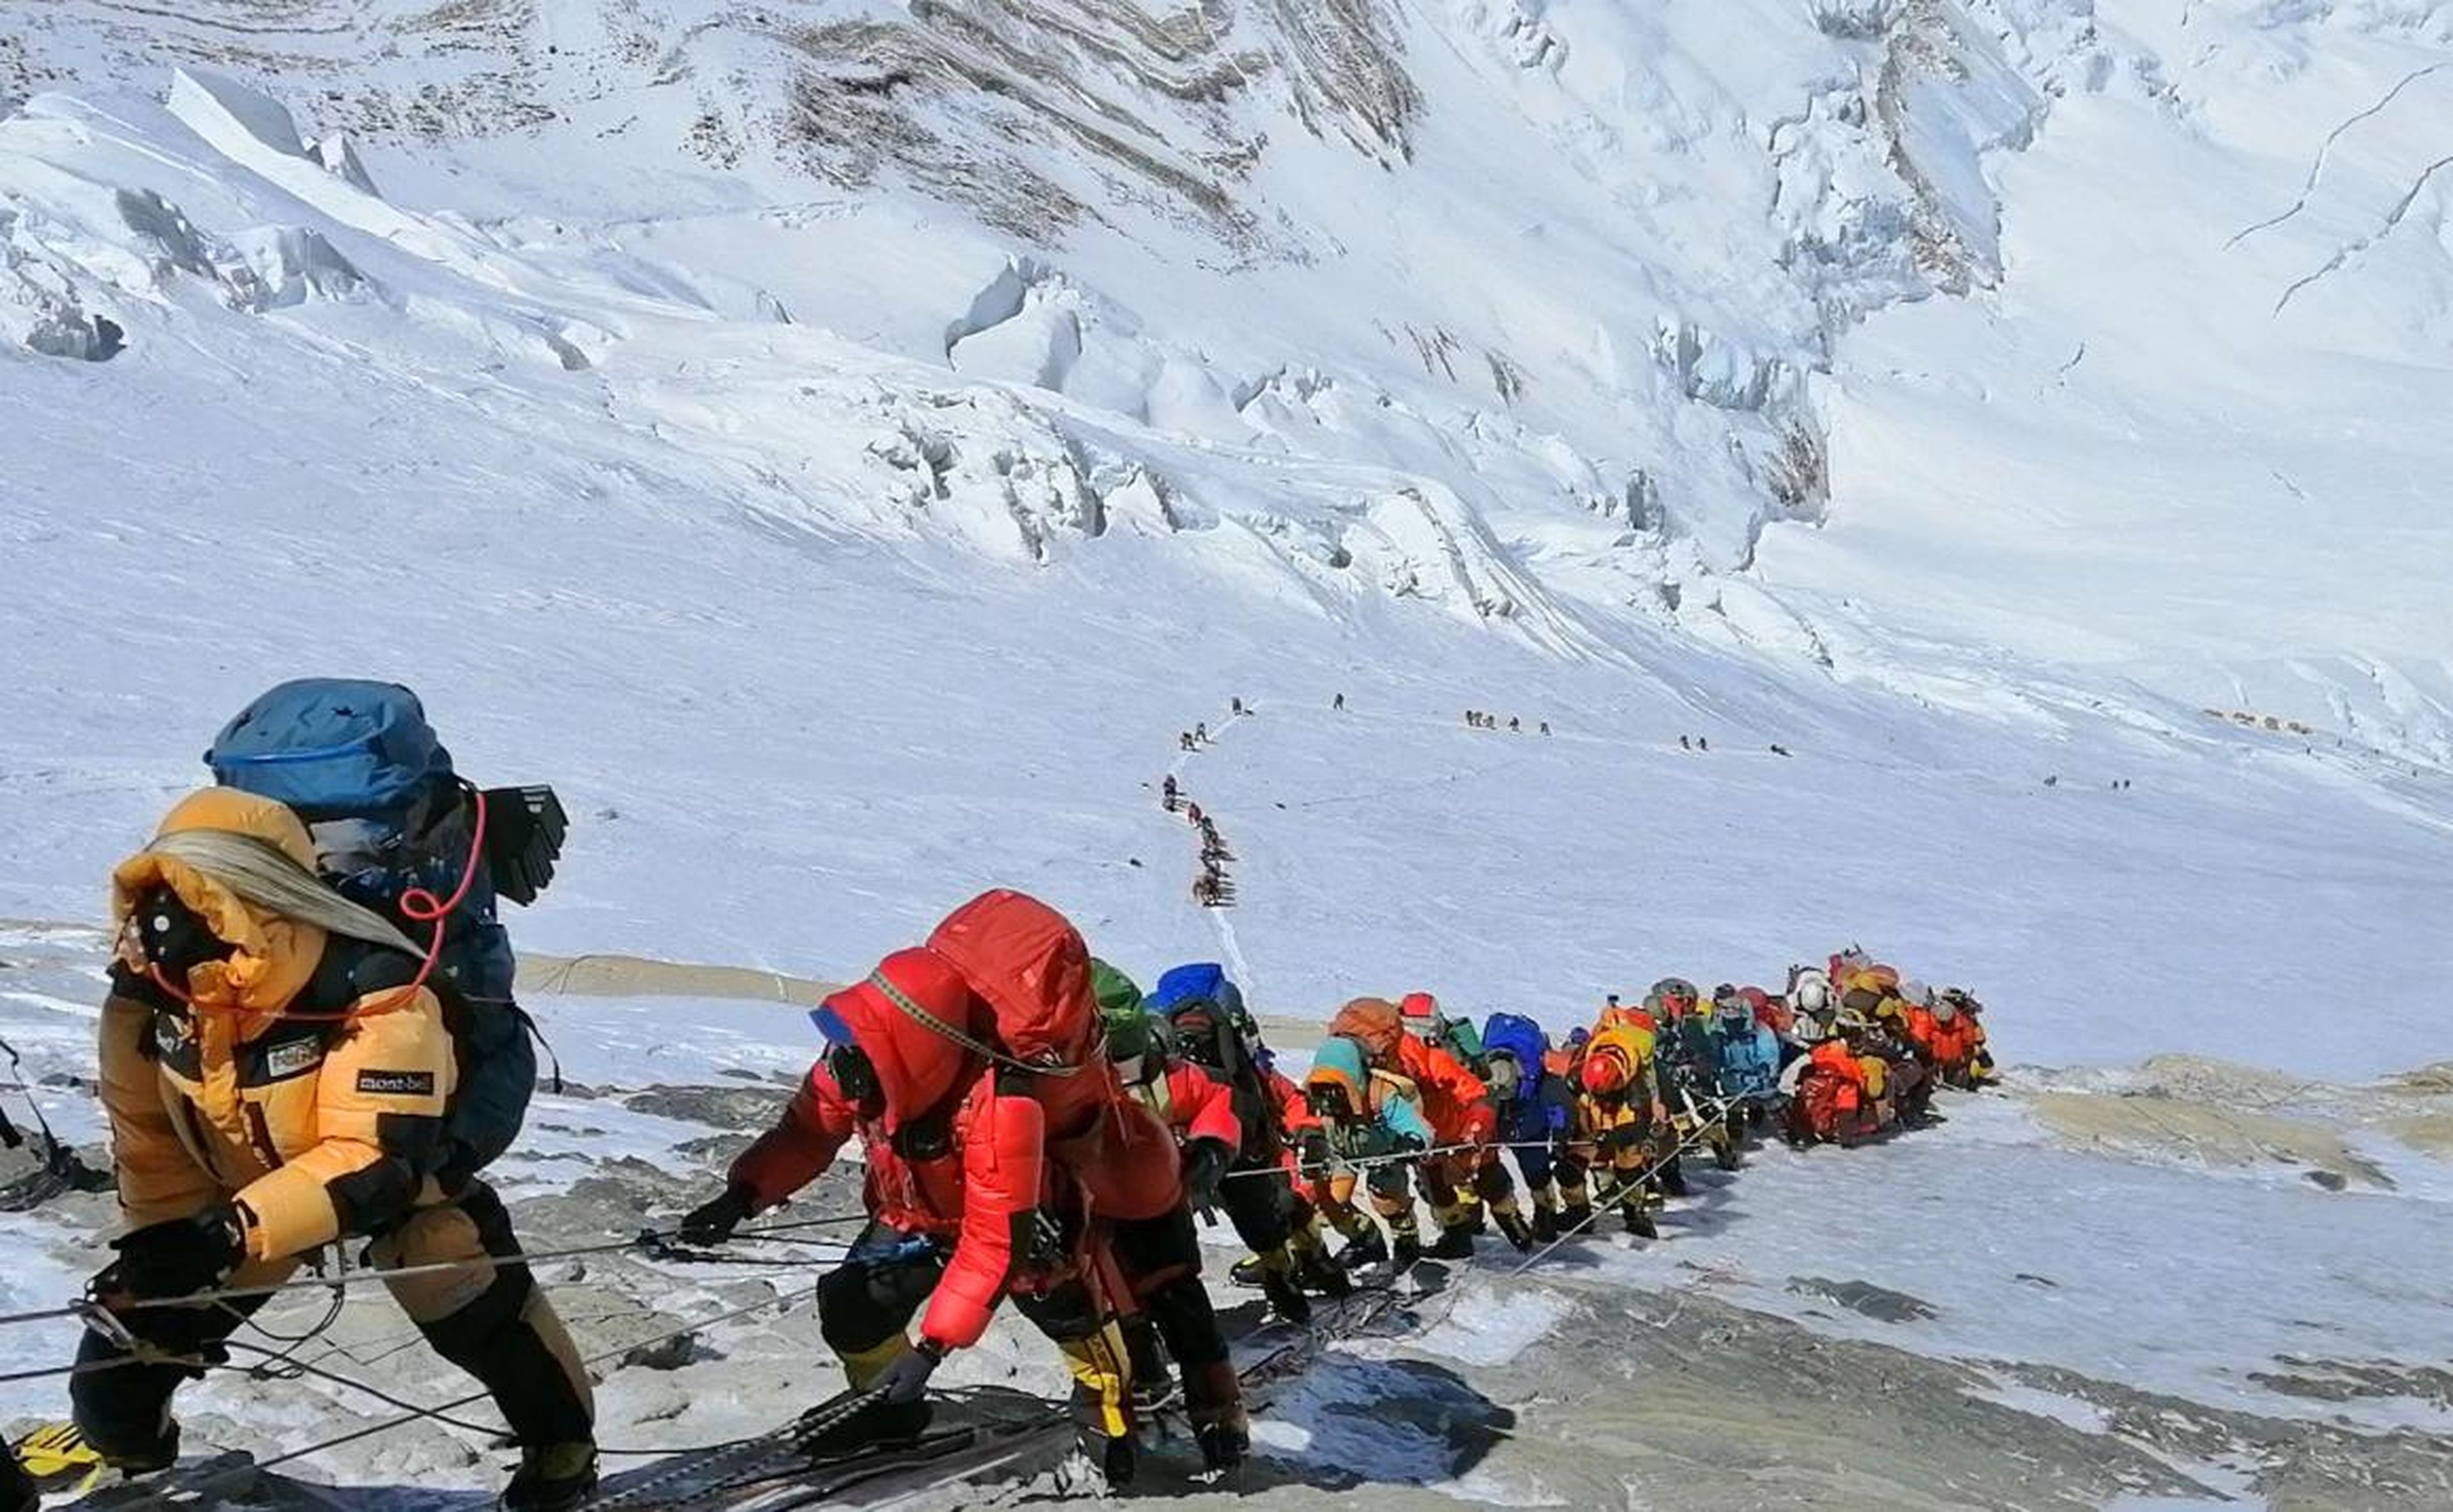 Lines waiting to reach the summit of Mount Everest are causing serious safety concerns.